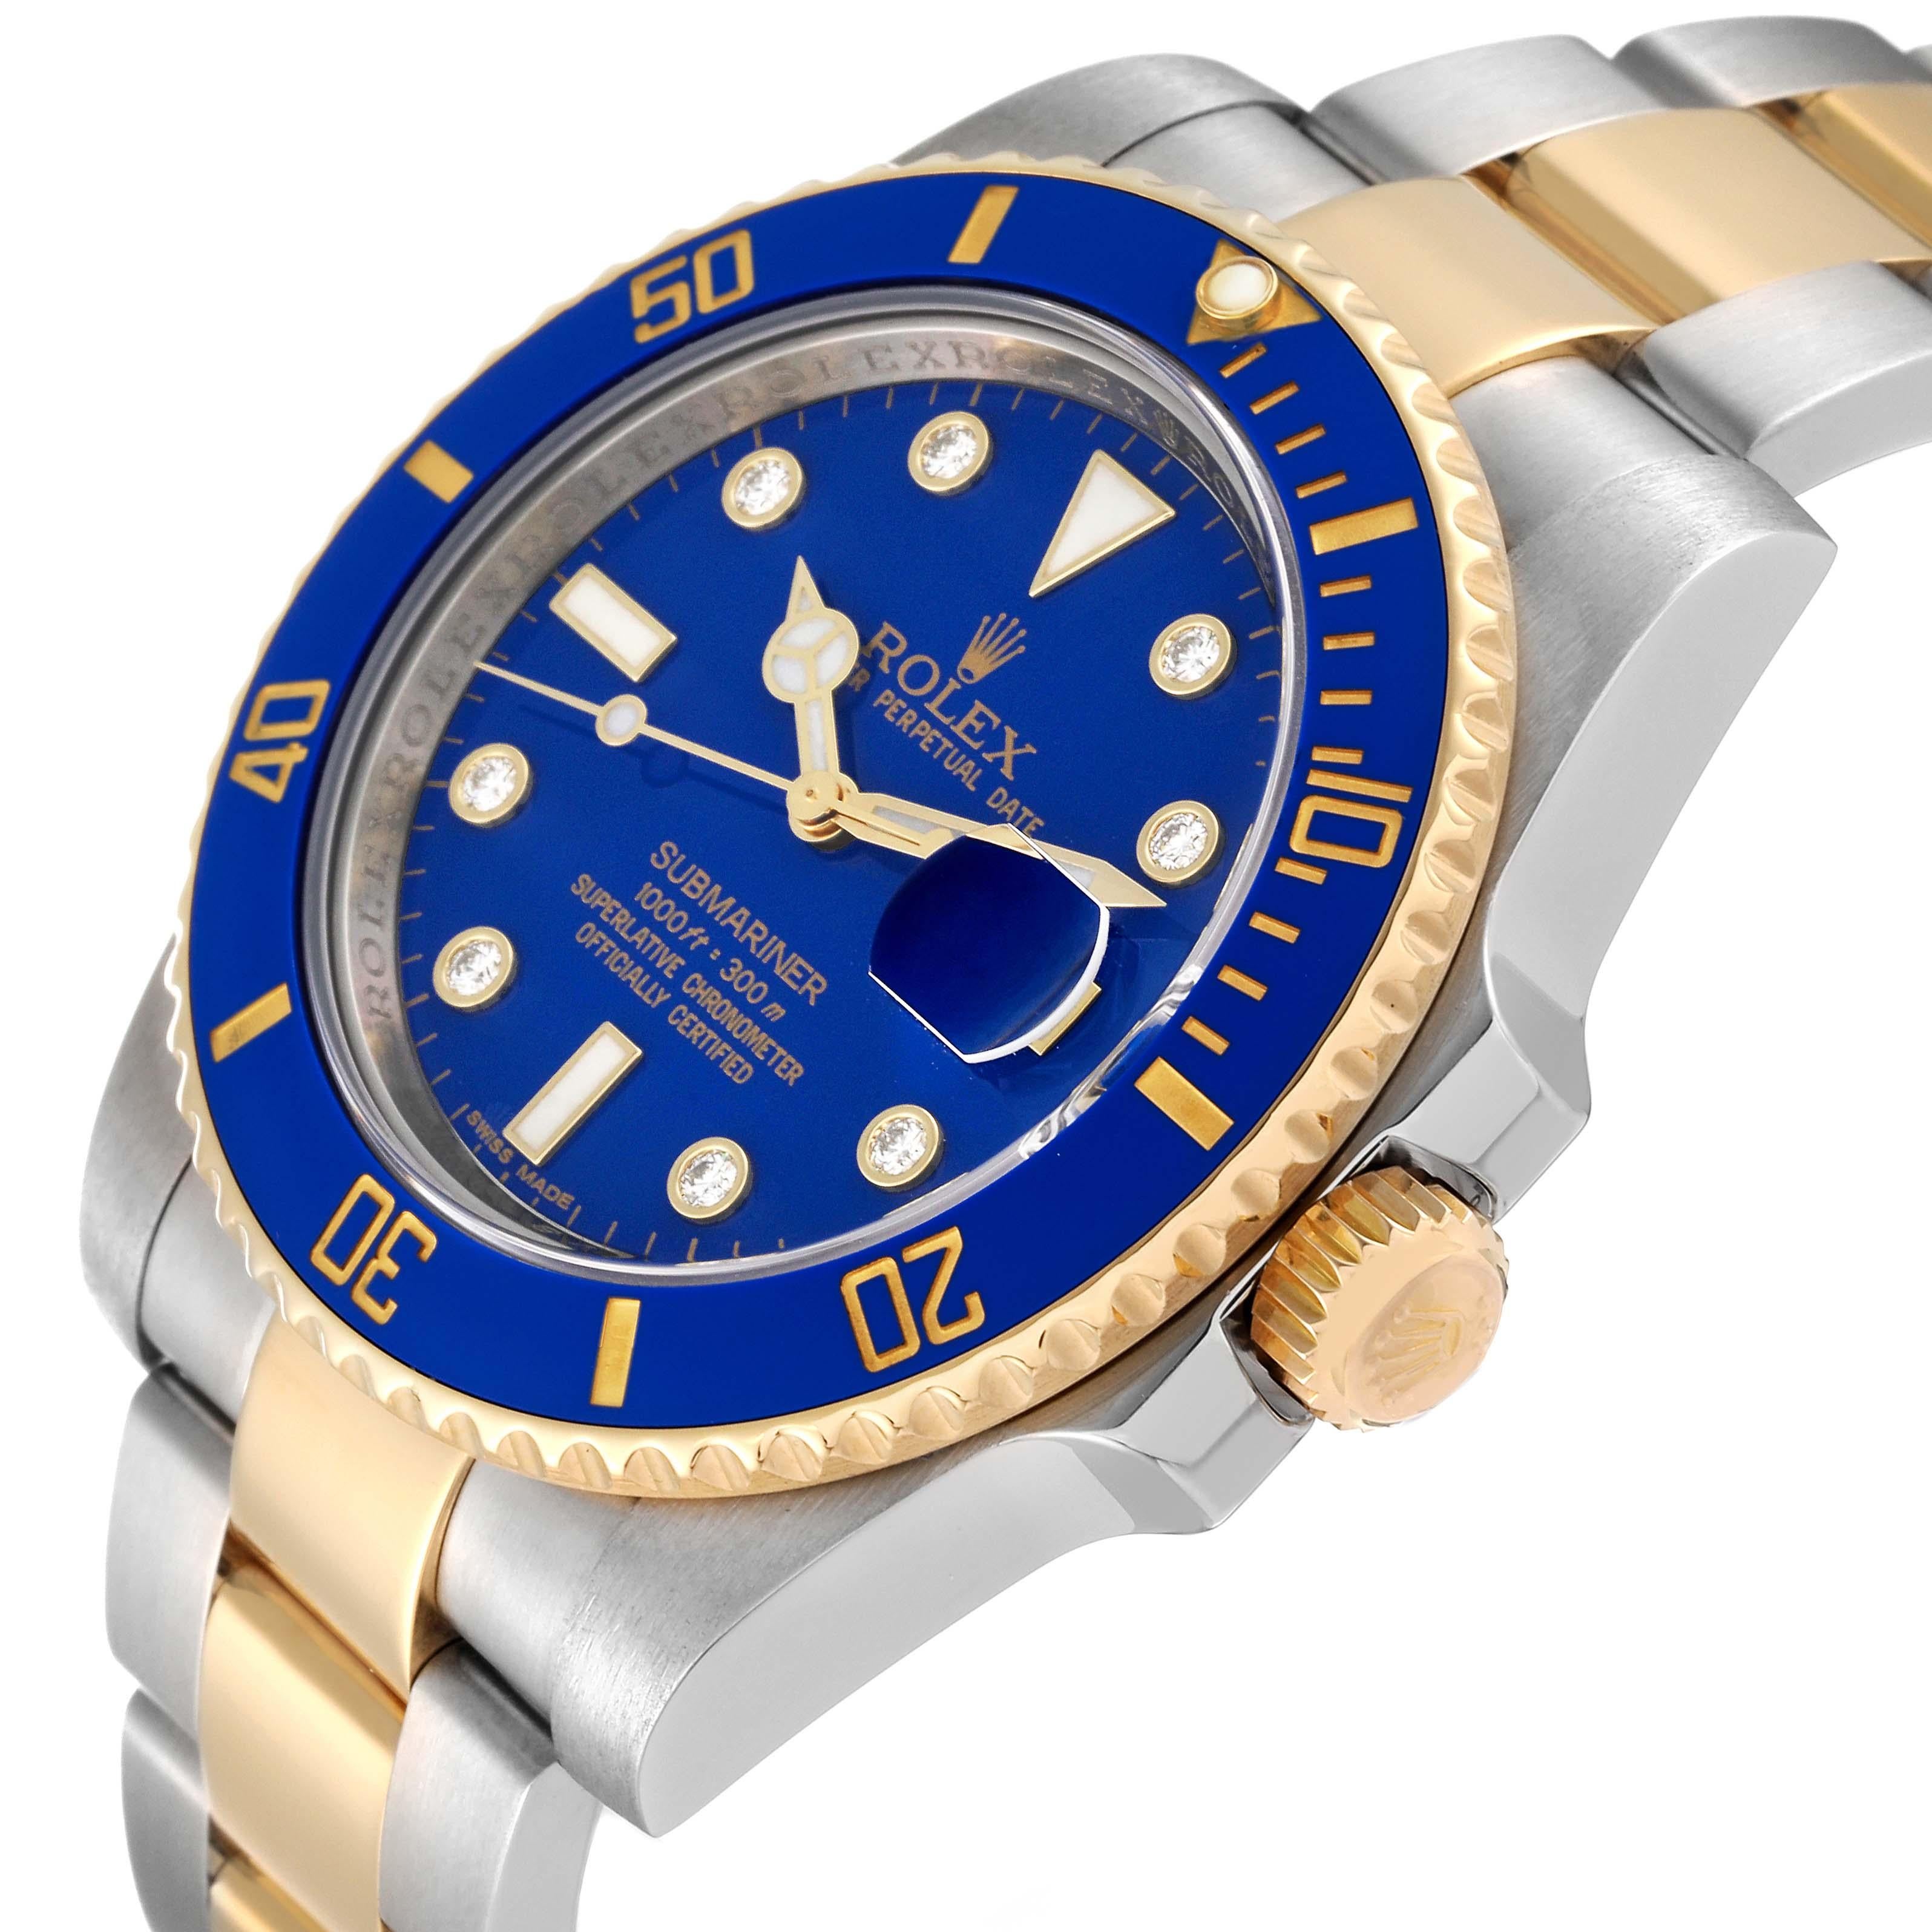 Rolex Submariner Steel Yellow Gold Blue Diamond Dial Mens Watch 116613 For Sale 1